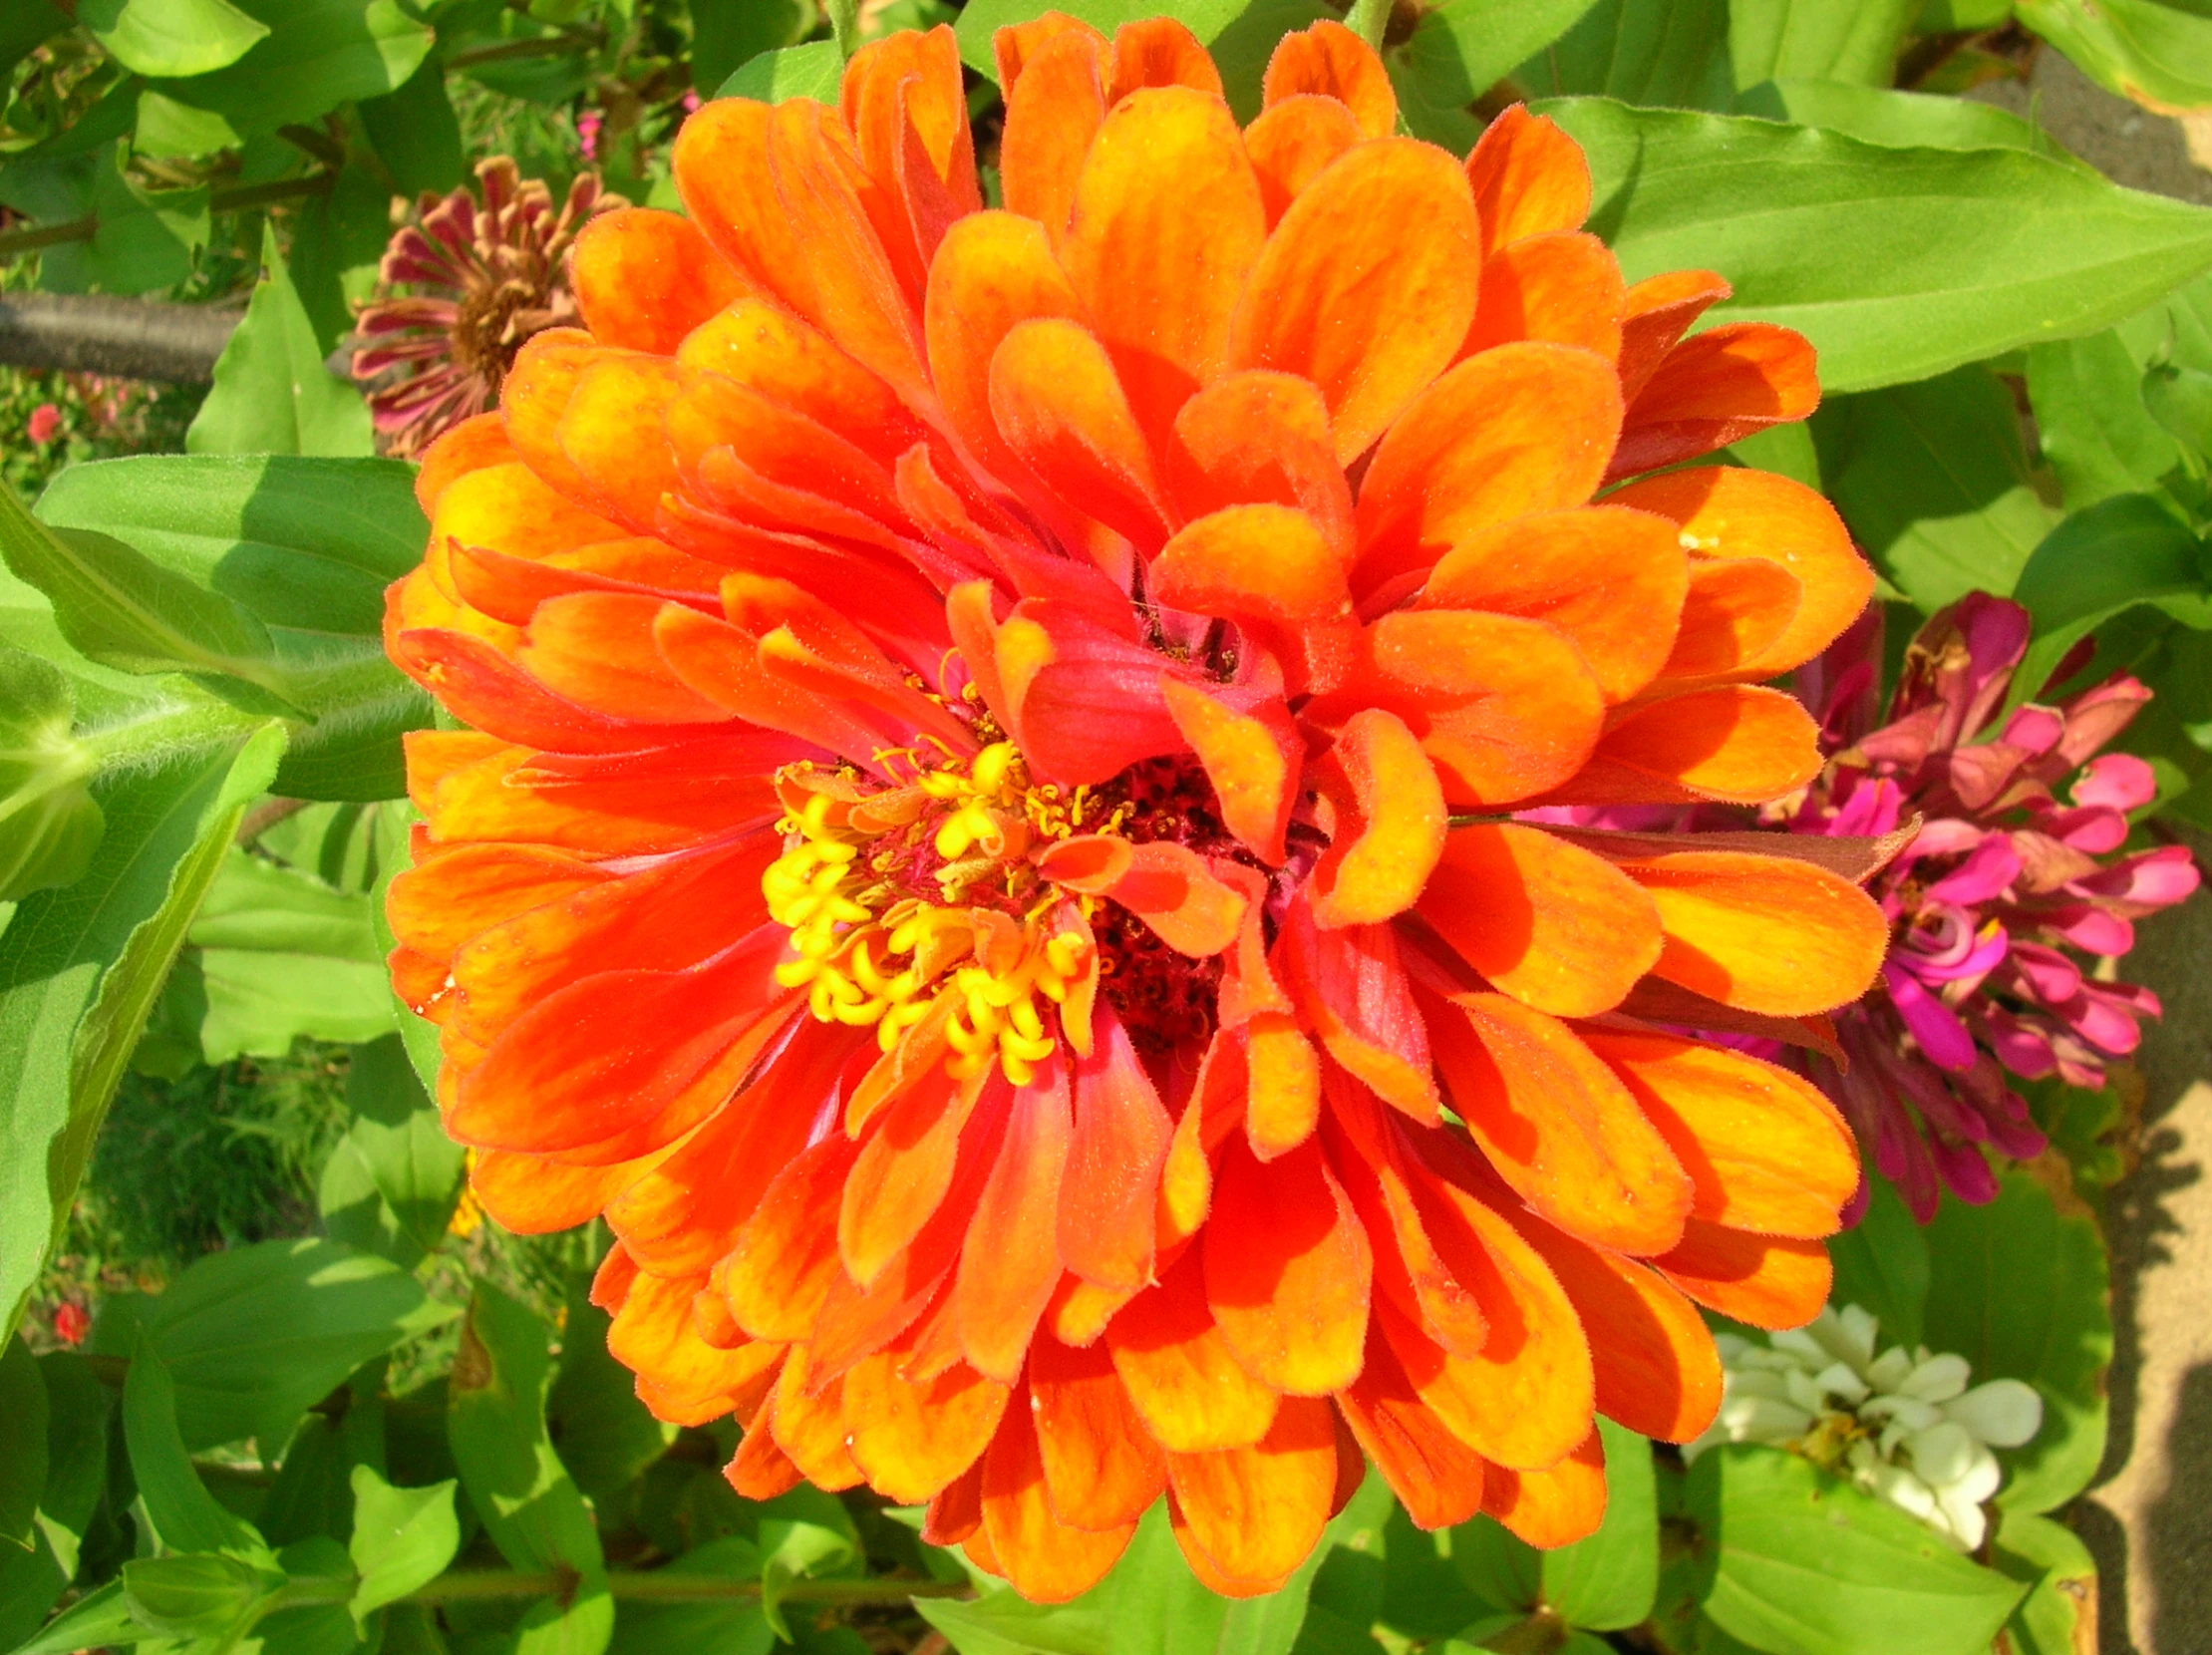 there is a red and orange flower that has been blooming